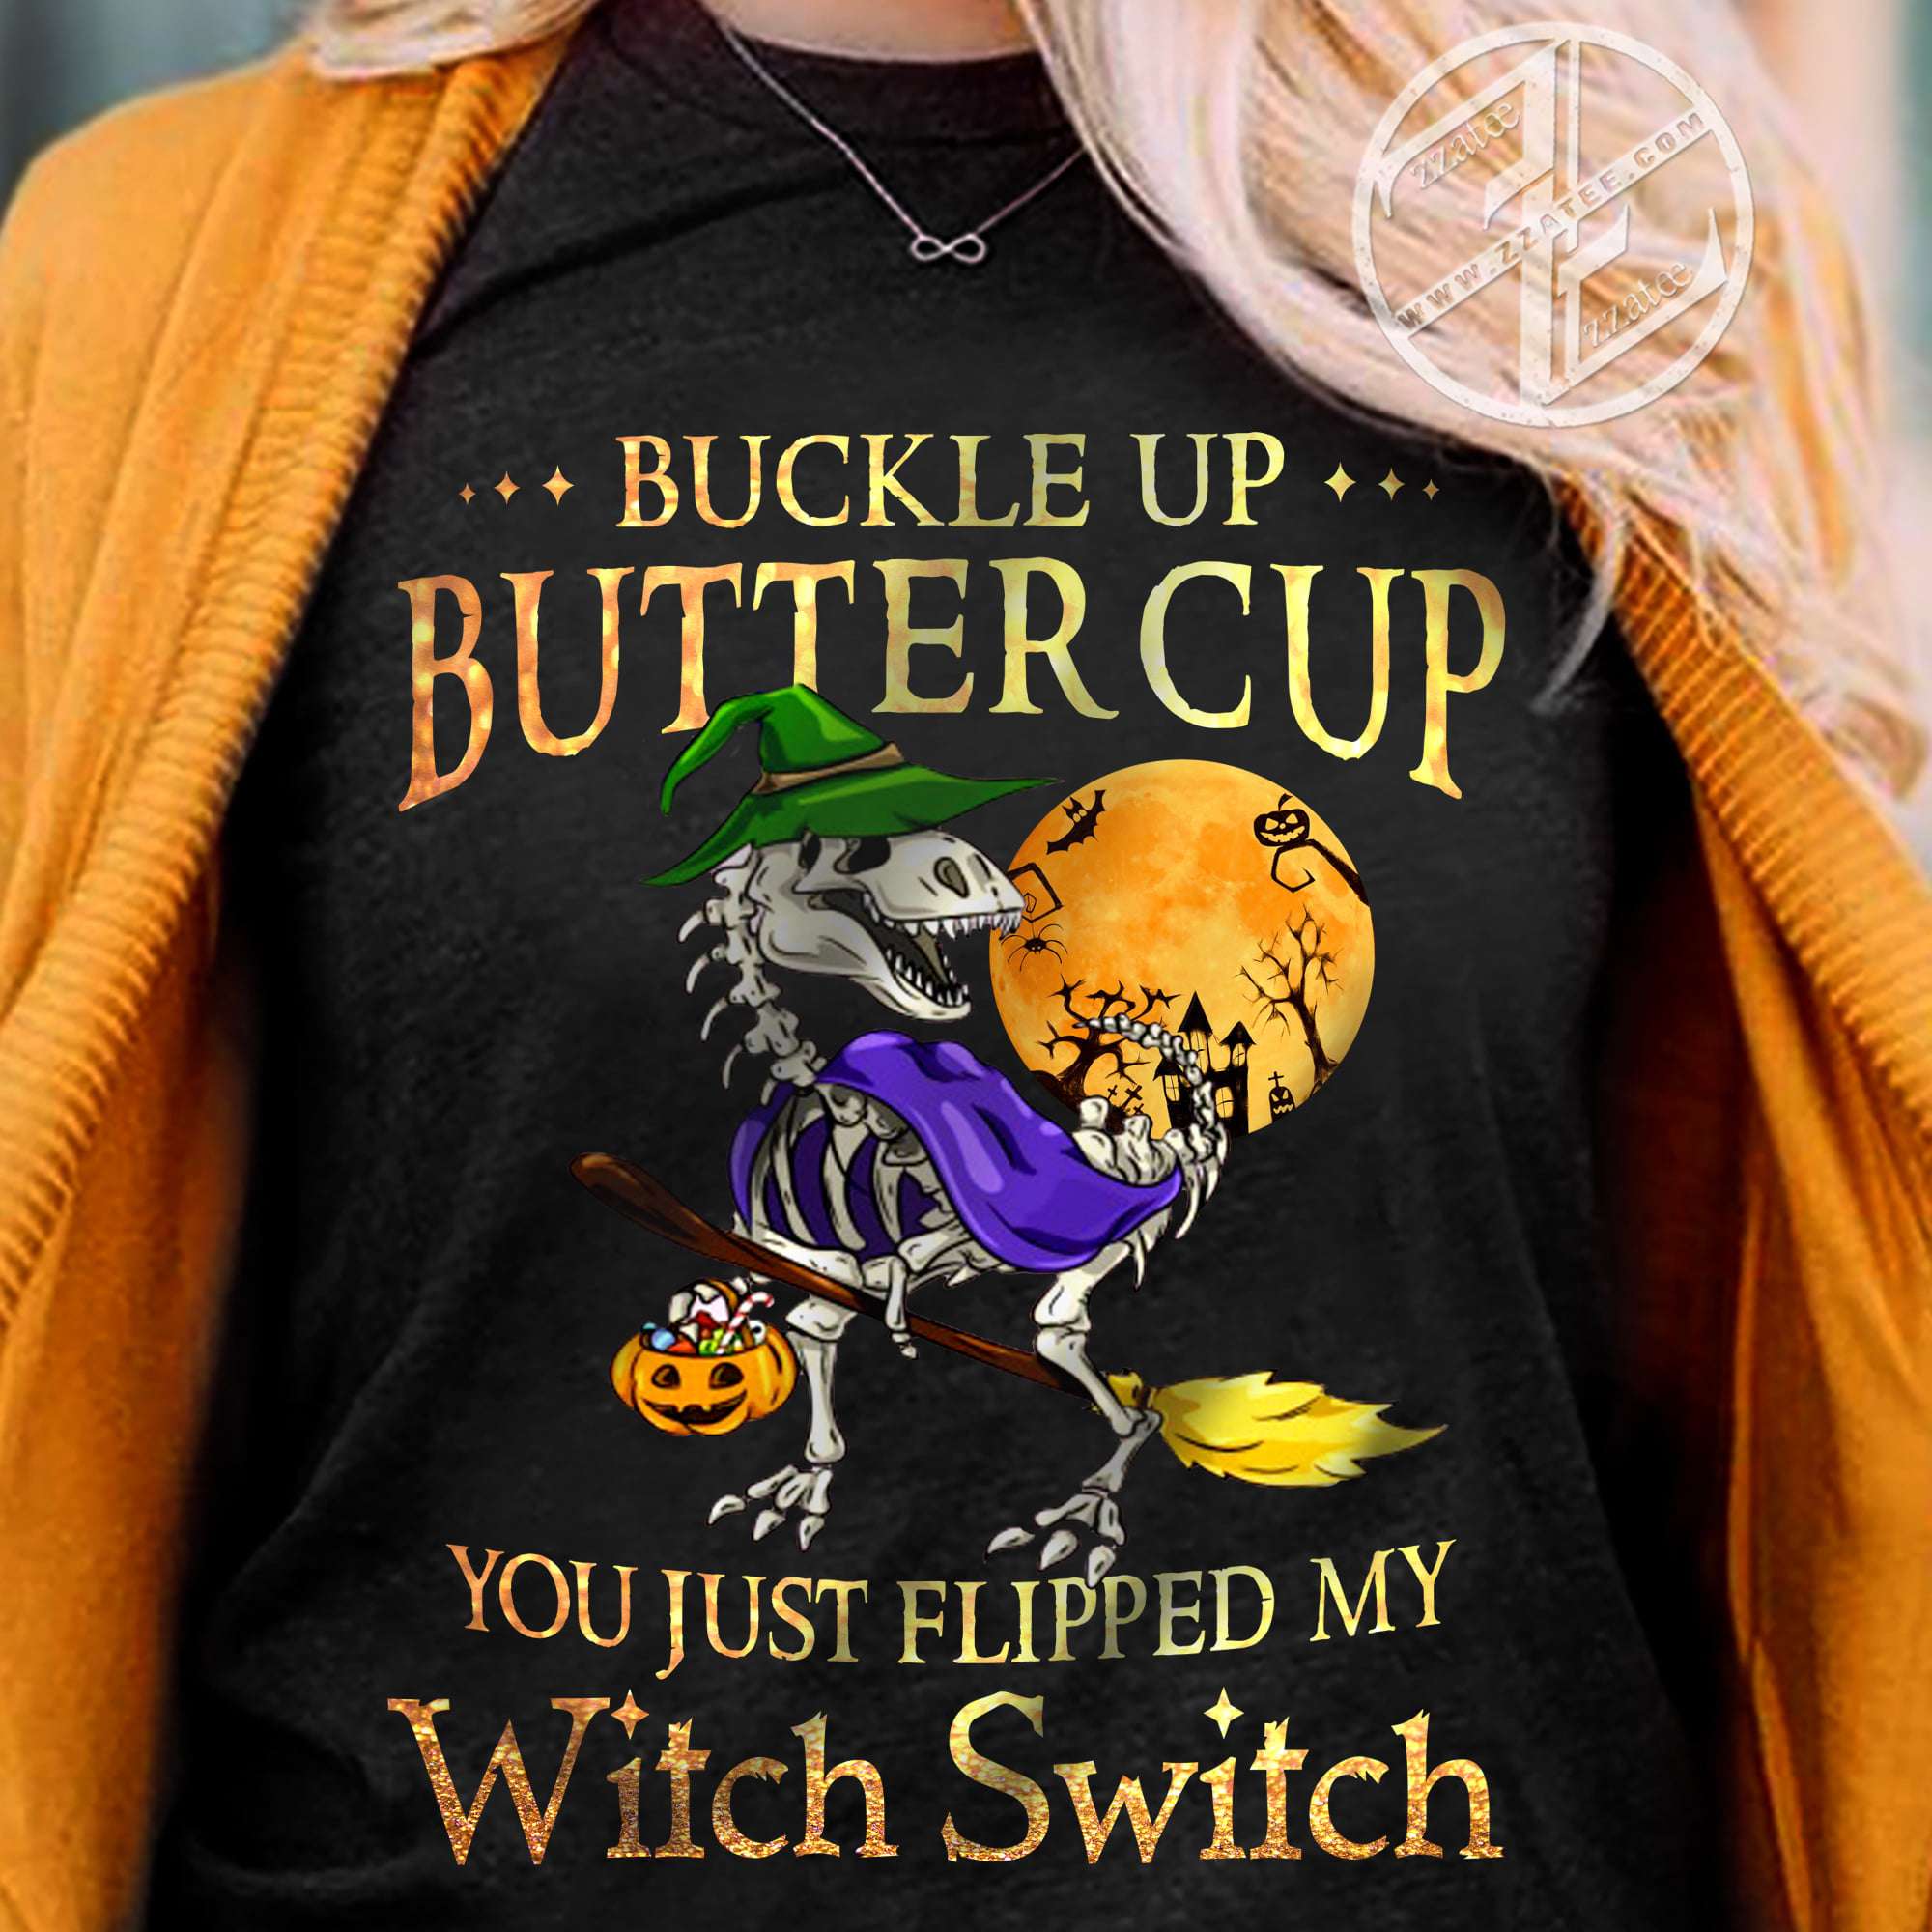 Buckle up buttercup you just flipped my witch switch - Halloween dinosaur witch